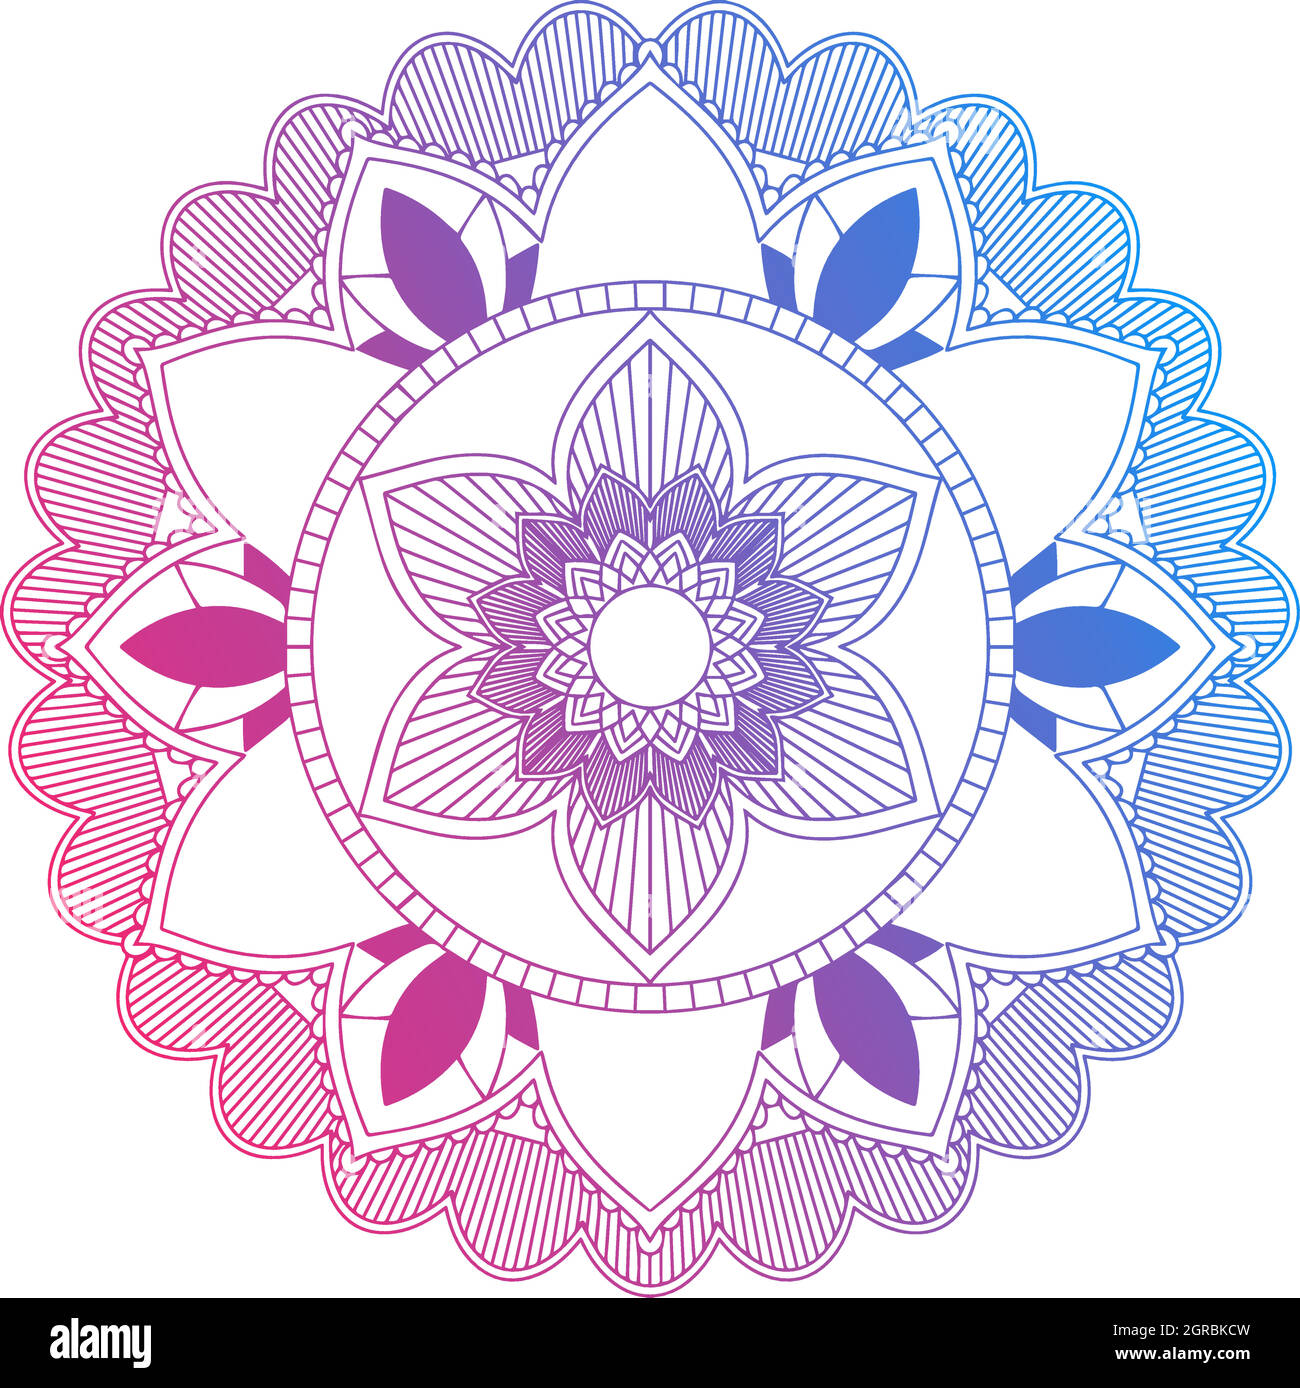 Mandala pattern design in red and blue Stock Vector